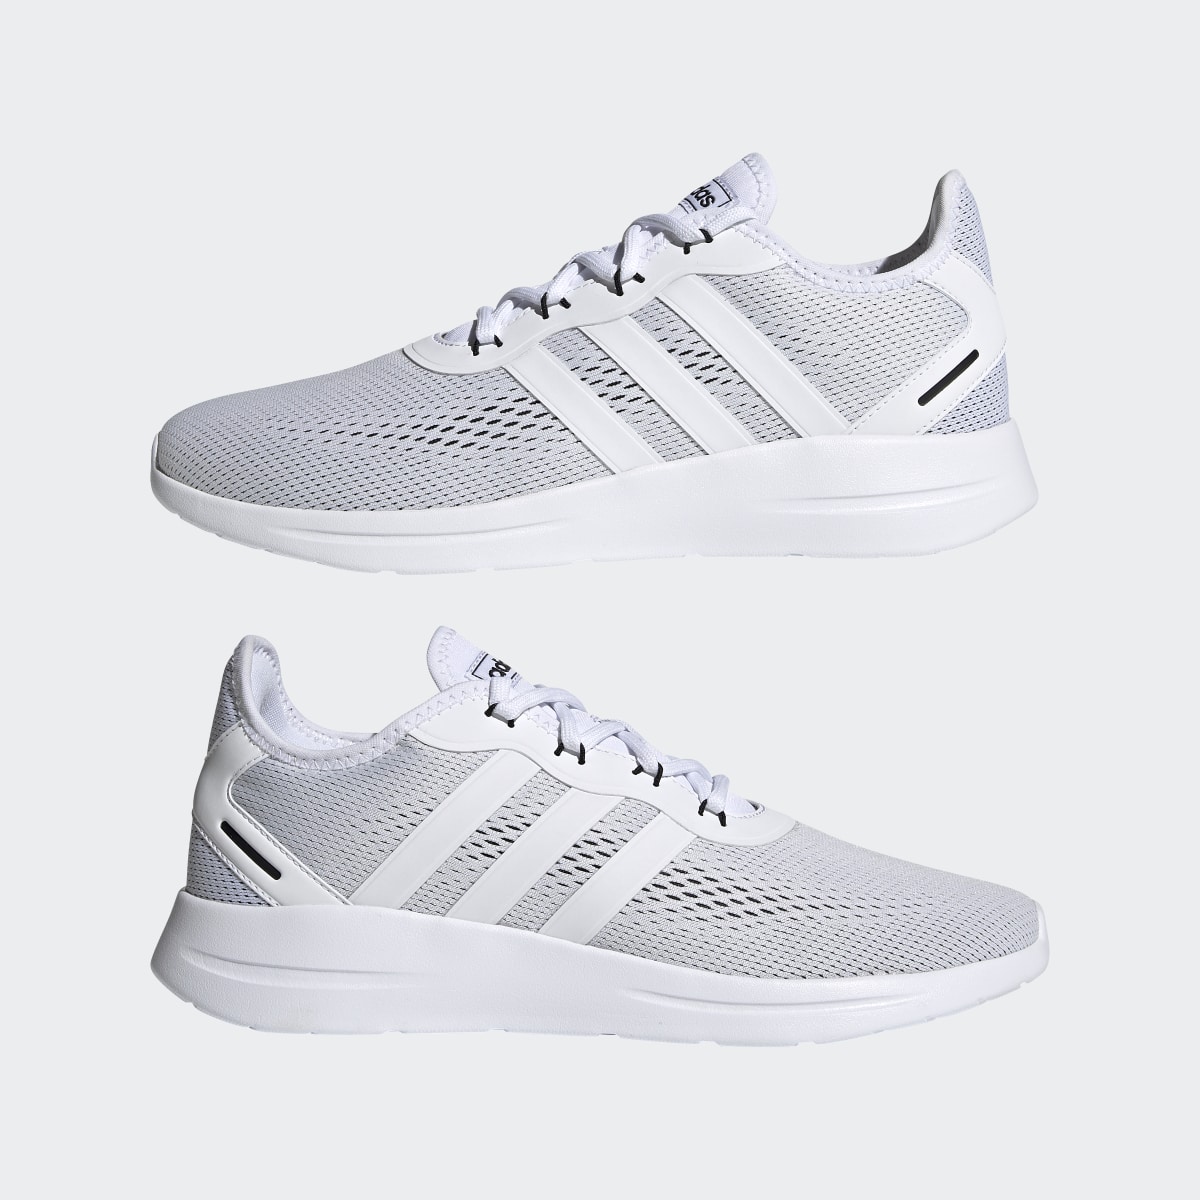 Adidas Lite Racer RBN 2.0 Shoes. 8